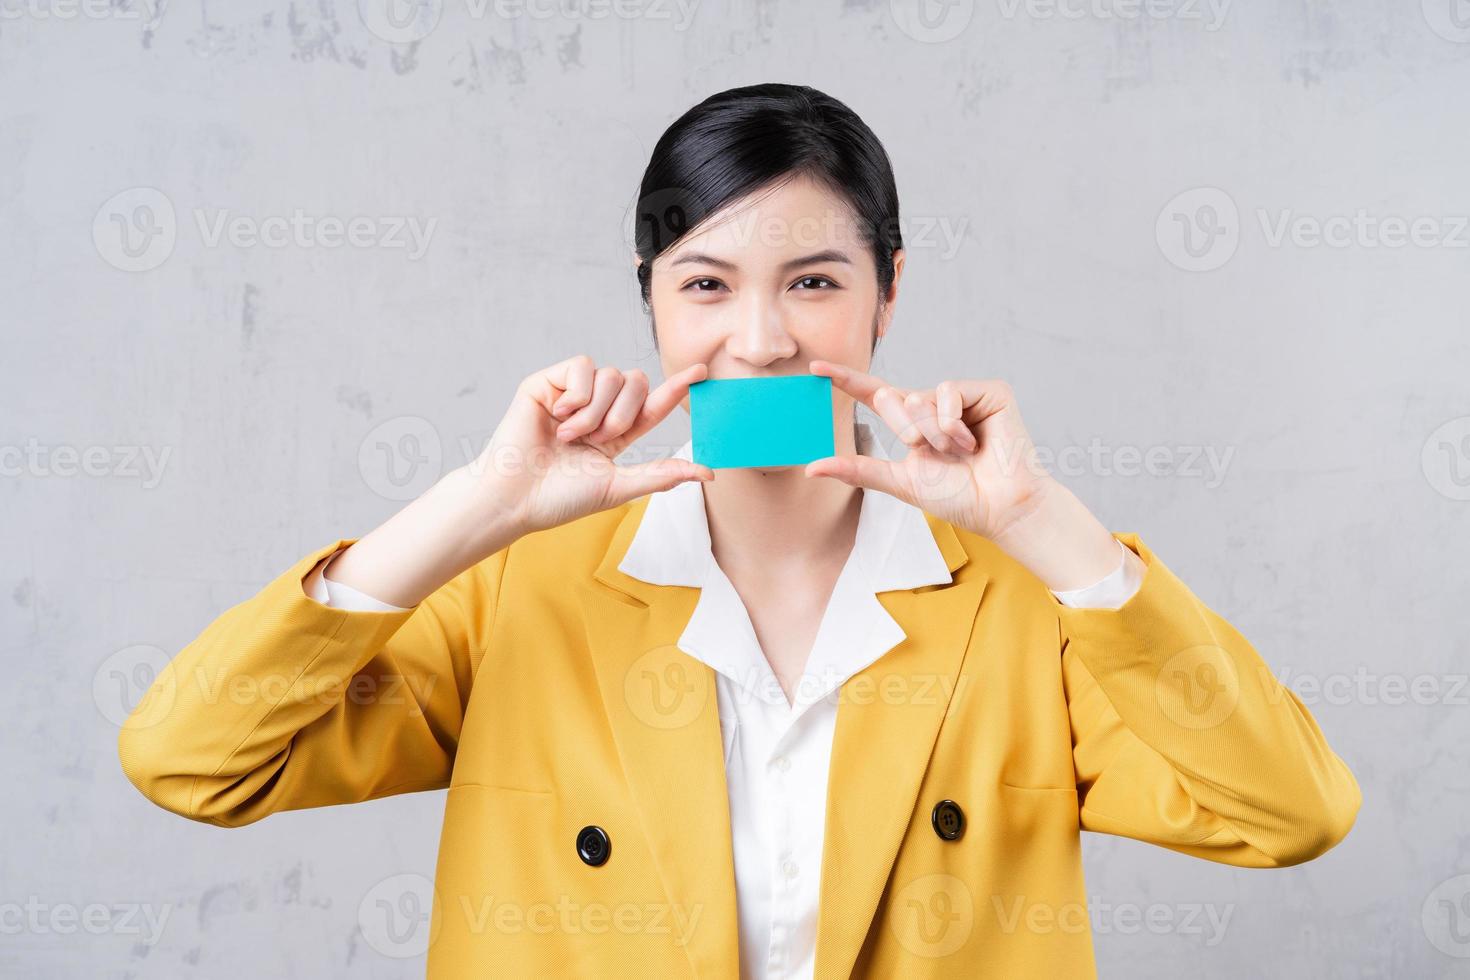 Image of young Asian woman holding bank card photo